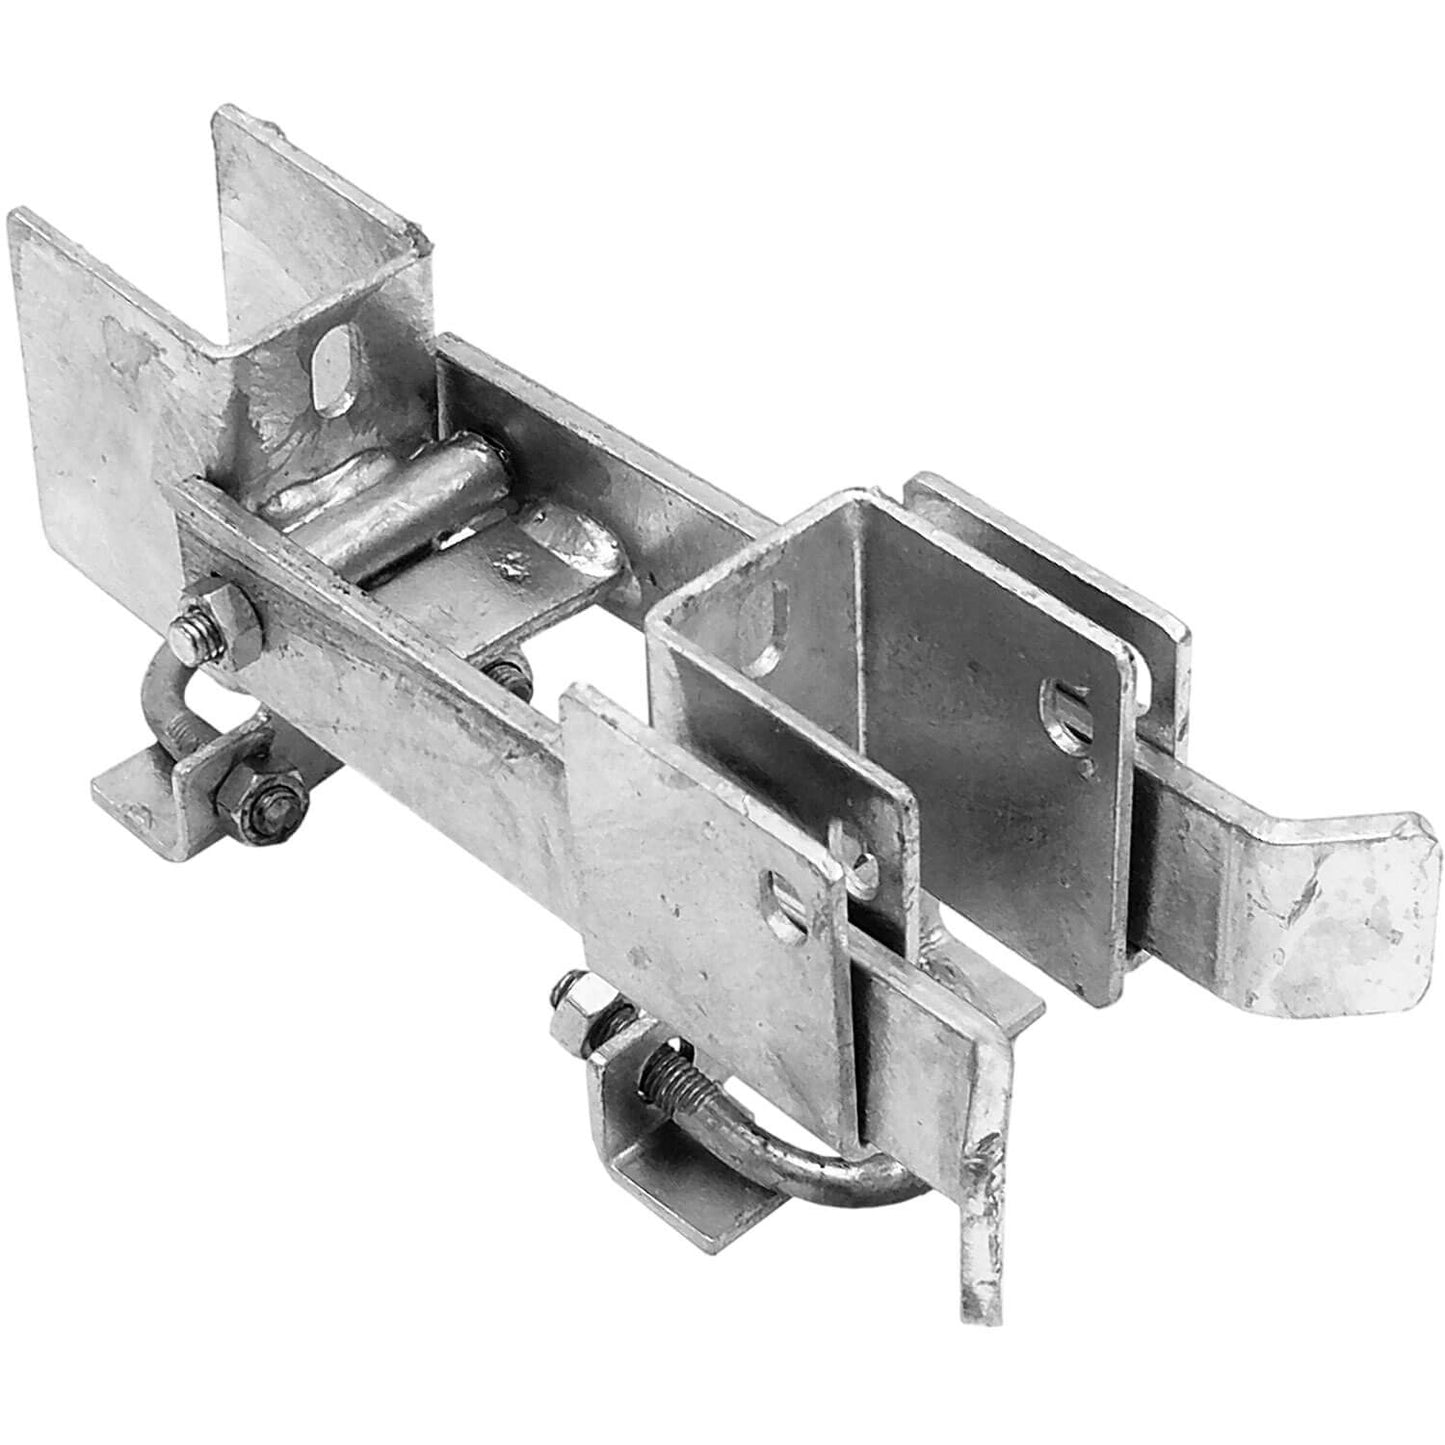 Strong Arm Double Gate Latch - Latches Two Gates Together without the Need of a Drop Rod